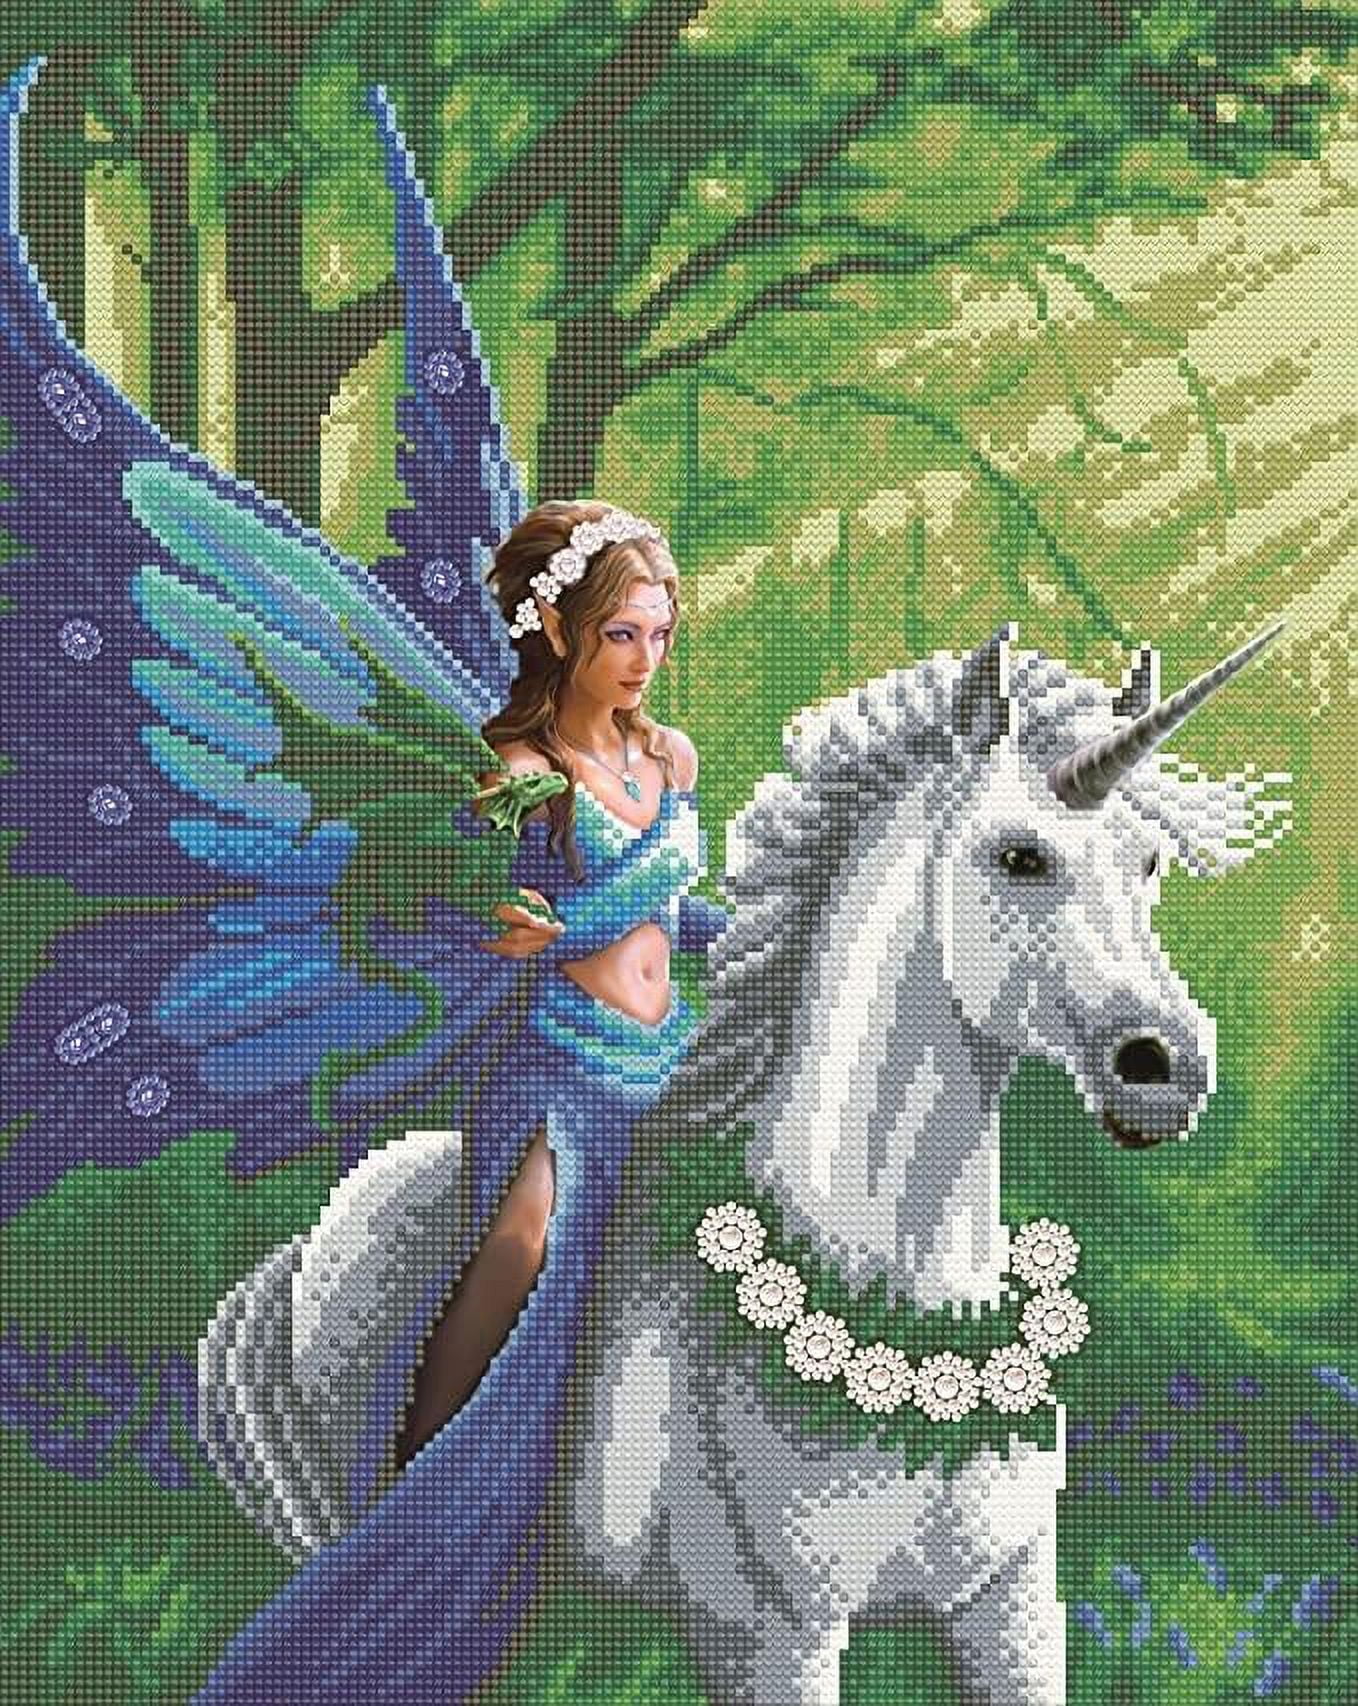 Craft Buddy Crystal Art / Diamond Painting 40cm x 50cm Picture Kit on Wood  Frame - Howling Wolf Club - Full Crystal 